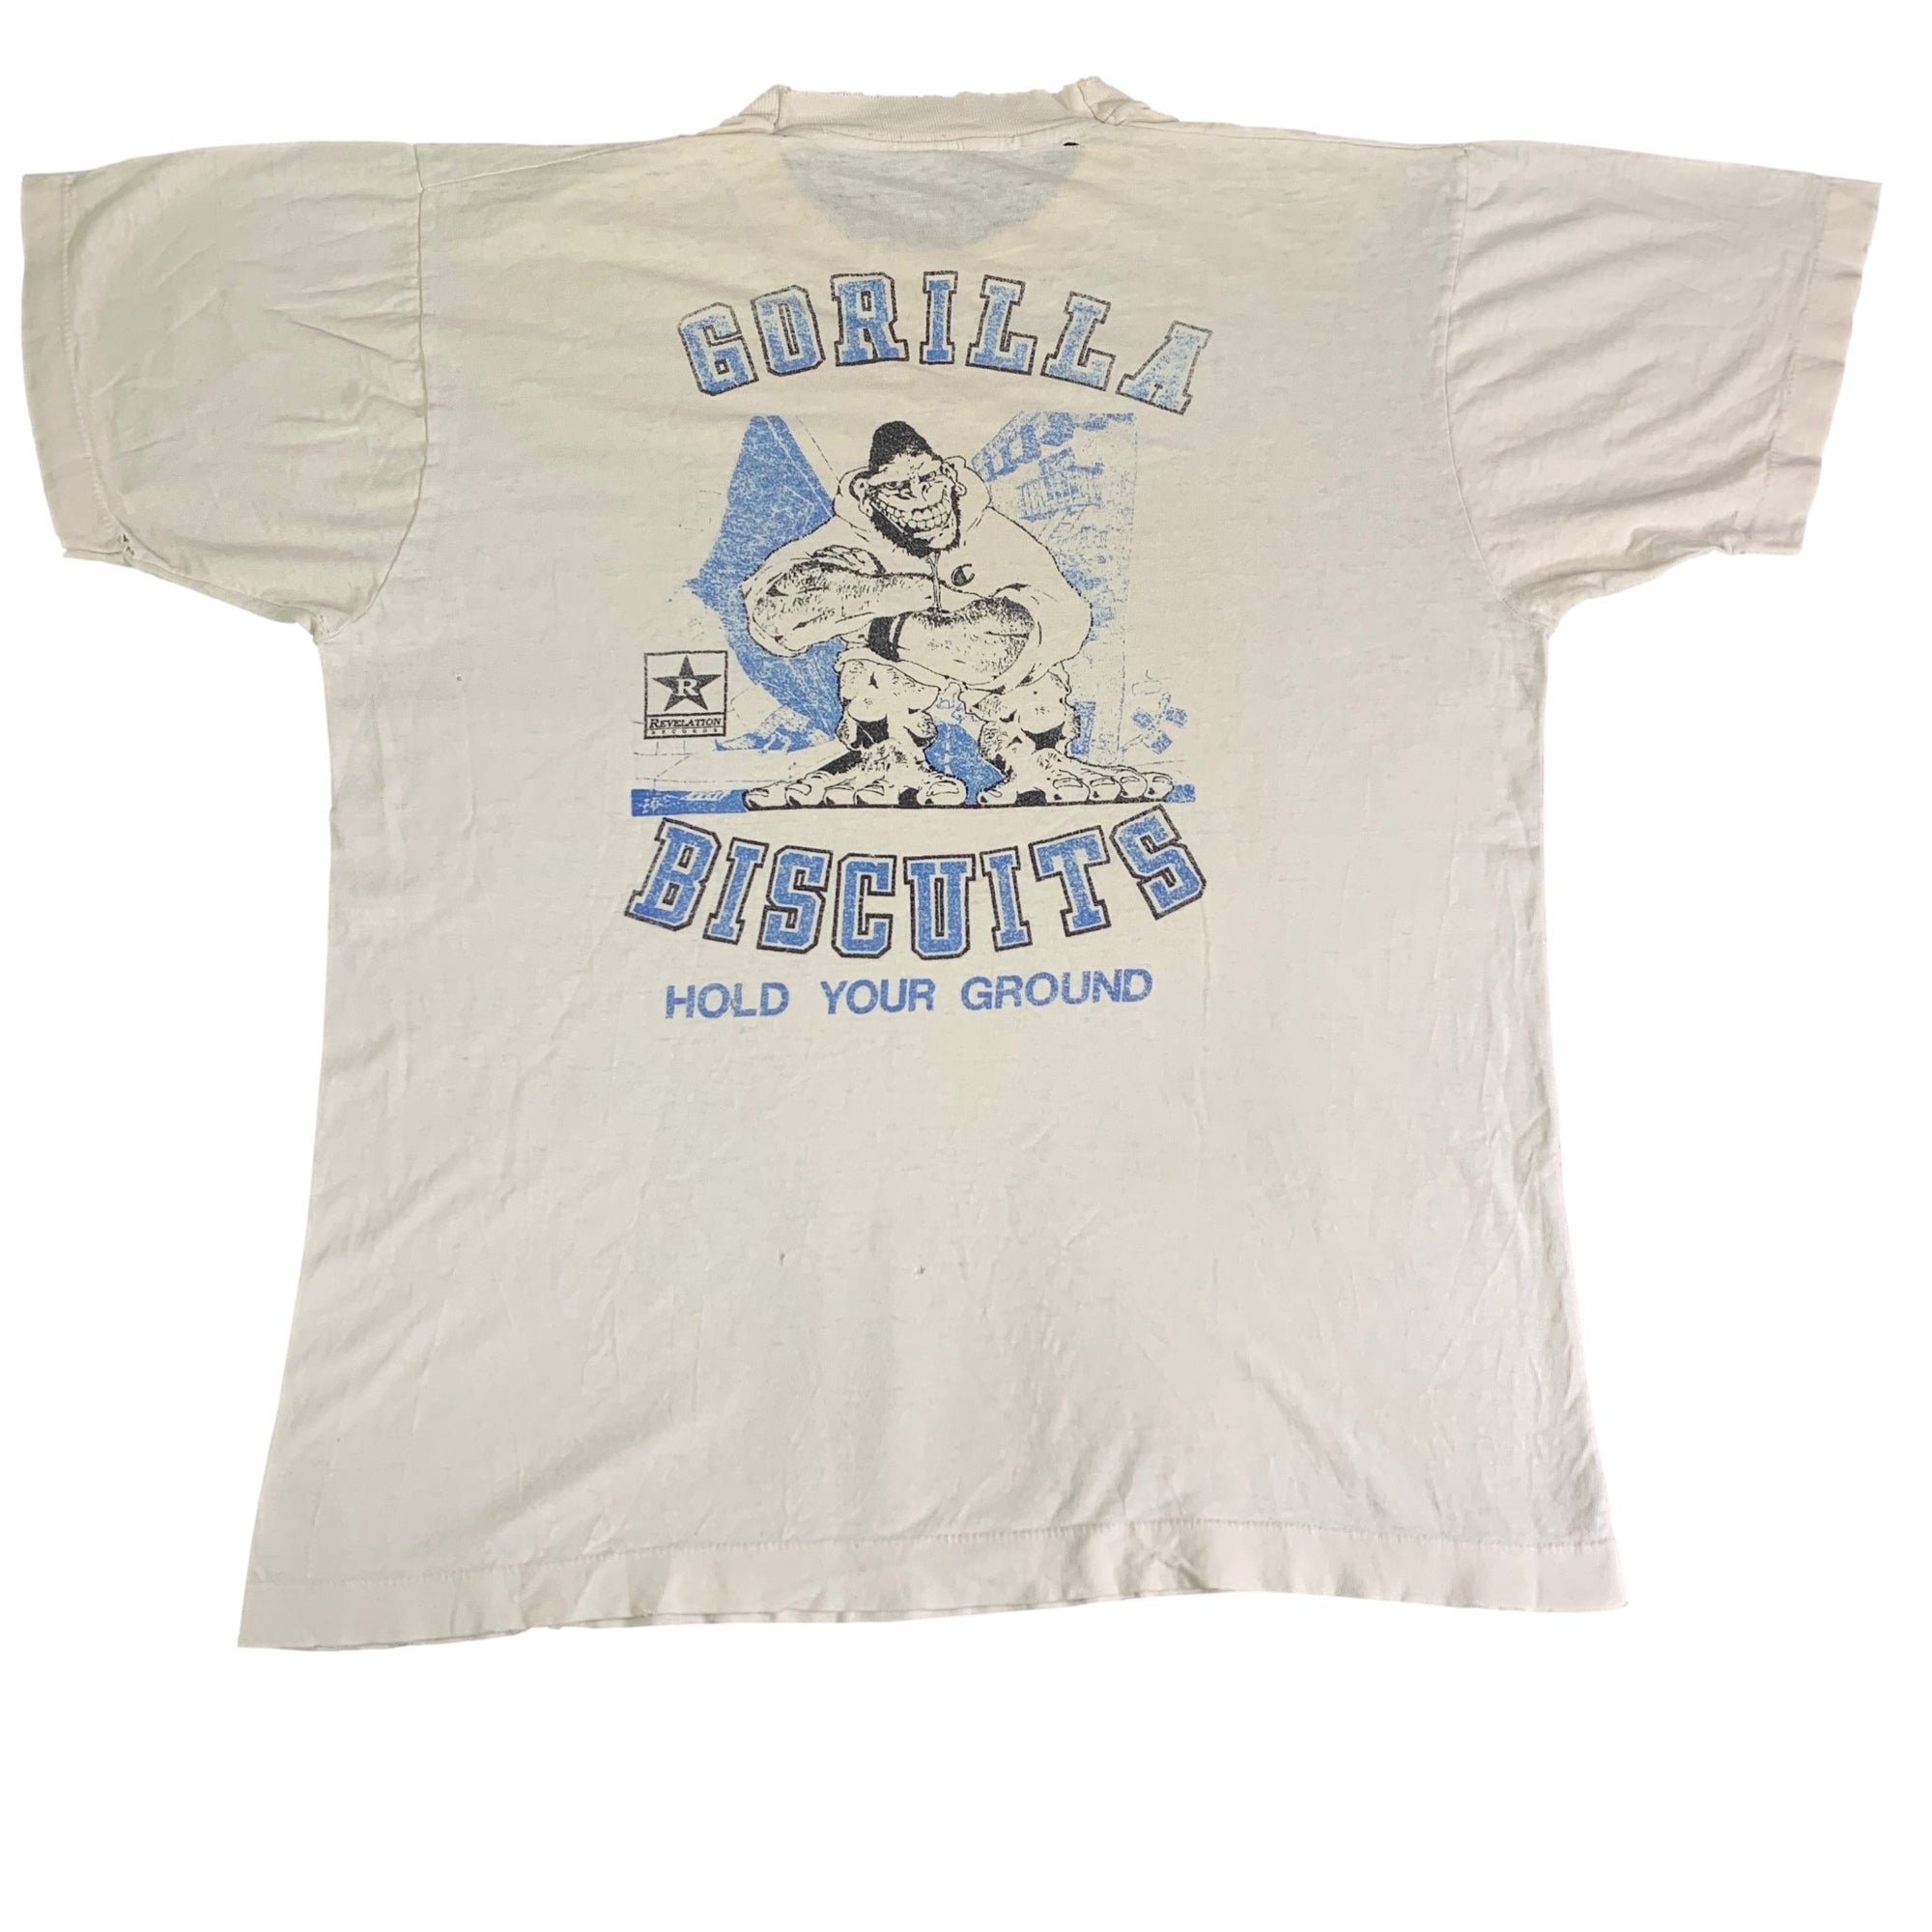 Vintage Gorilla Biscuits "Hold Your Ground" T-Shirt - jointcustodydc